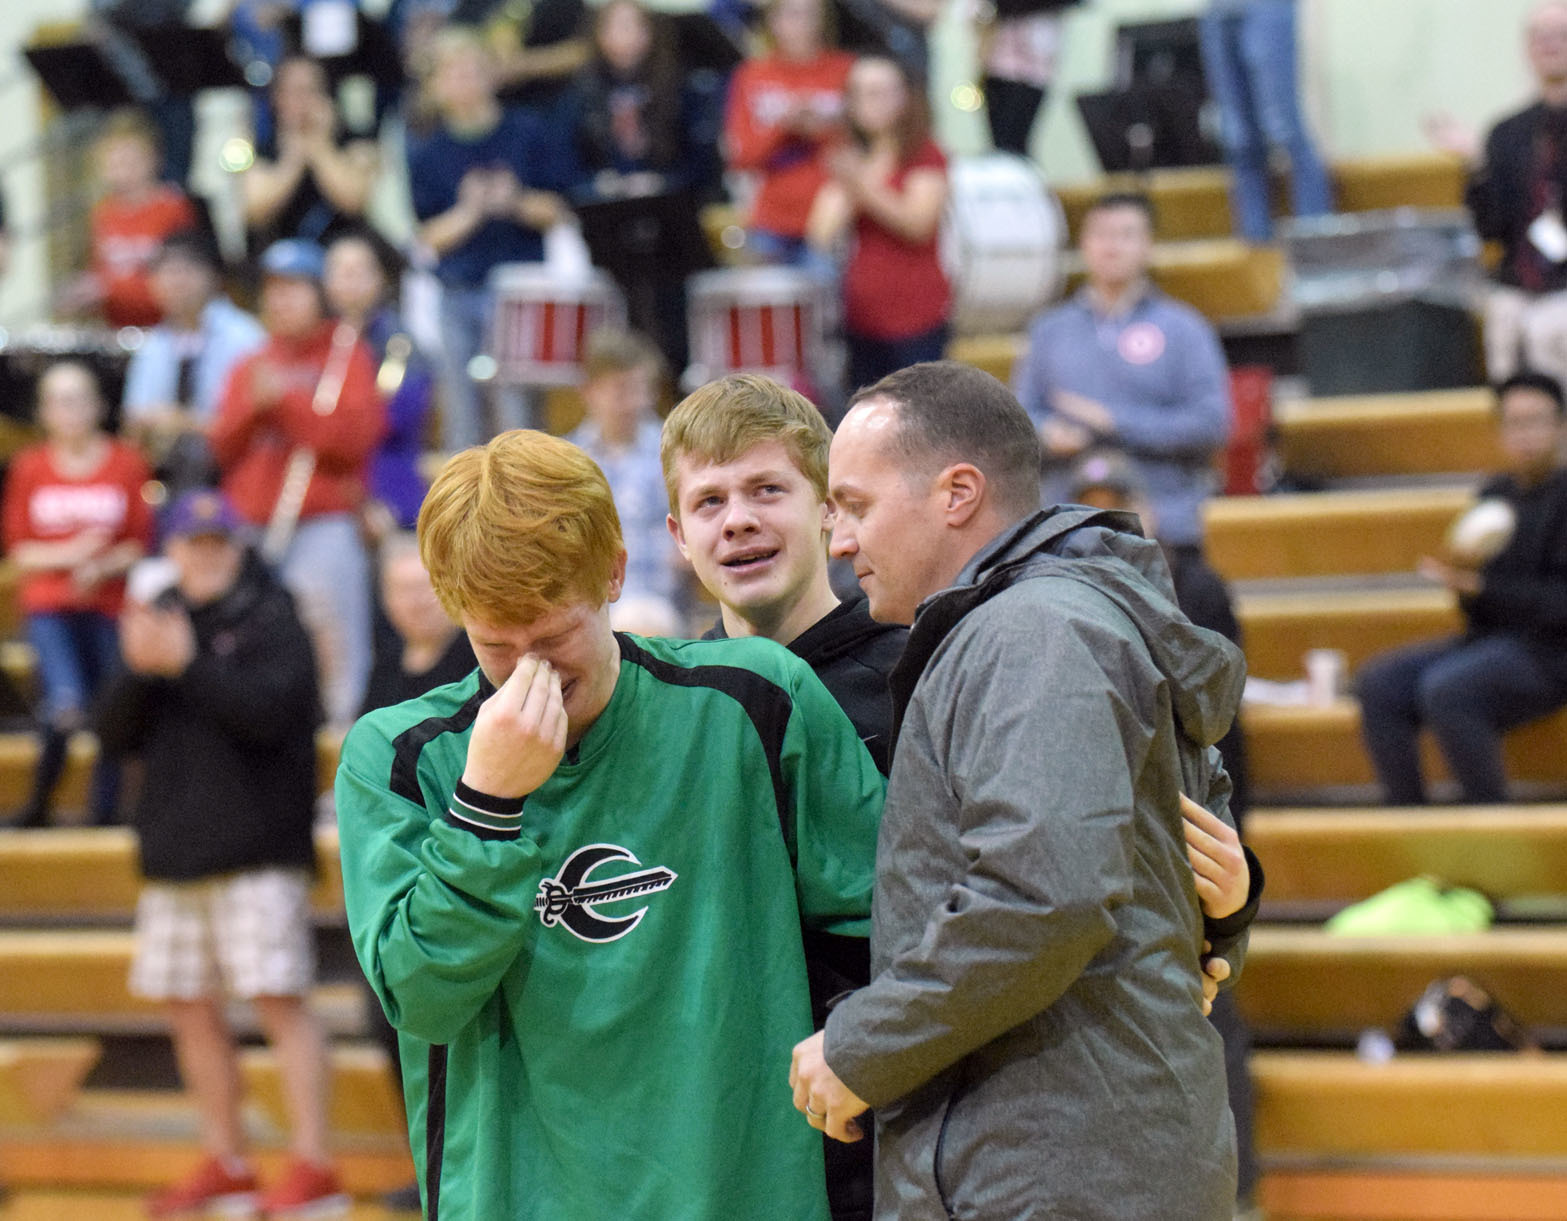 Maj. Josh Pead (right) embraces his sons Nick and Cameron in an emotional hug before Thursday night's varsity boys basketball game at Kenai Central High School. Pead, a physican in the Army, made a surprise appearance after returning from a six-month military deployment in the Middle East. (Photo by Jeff Helminiak/Peninsula Clarion)